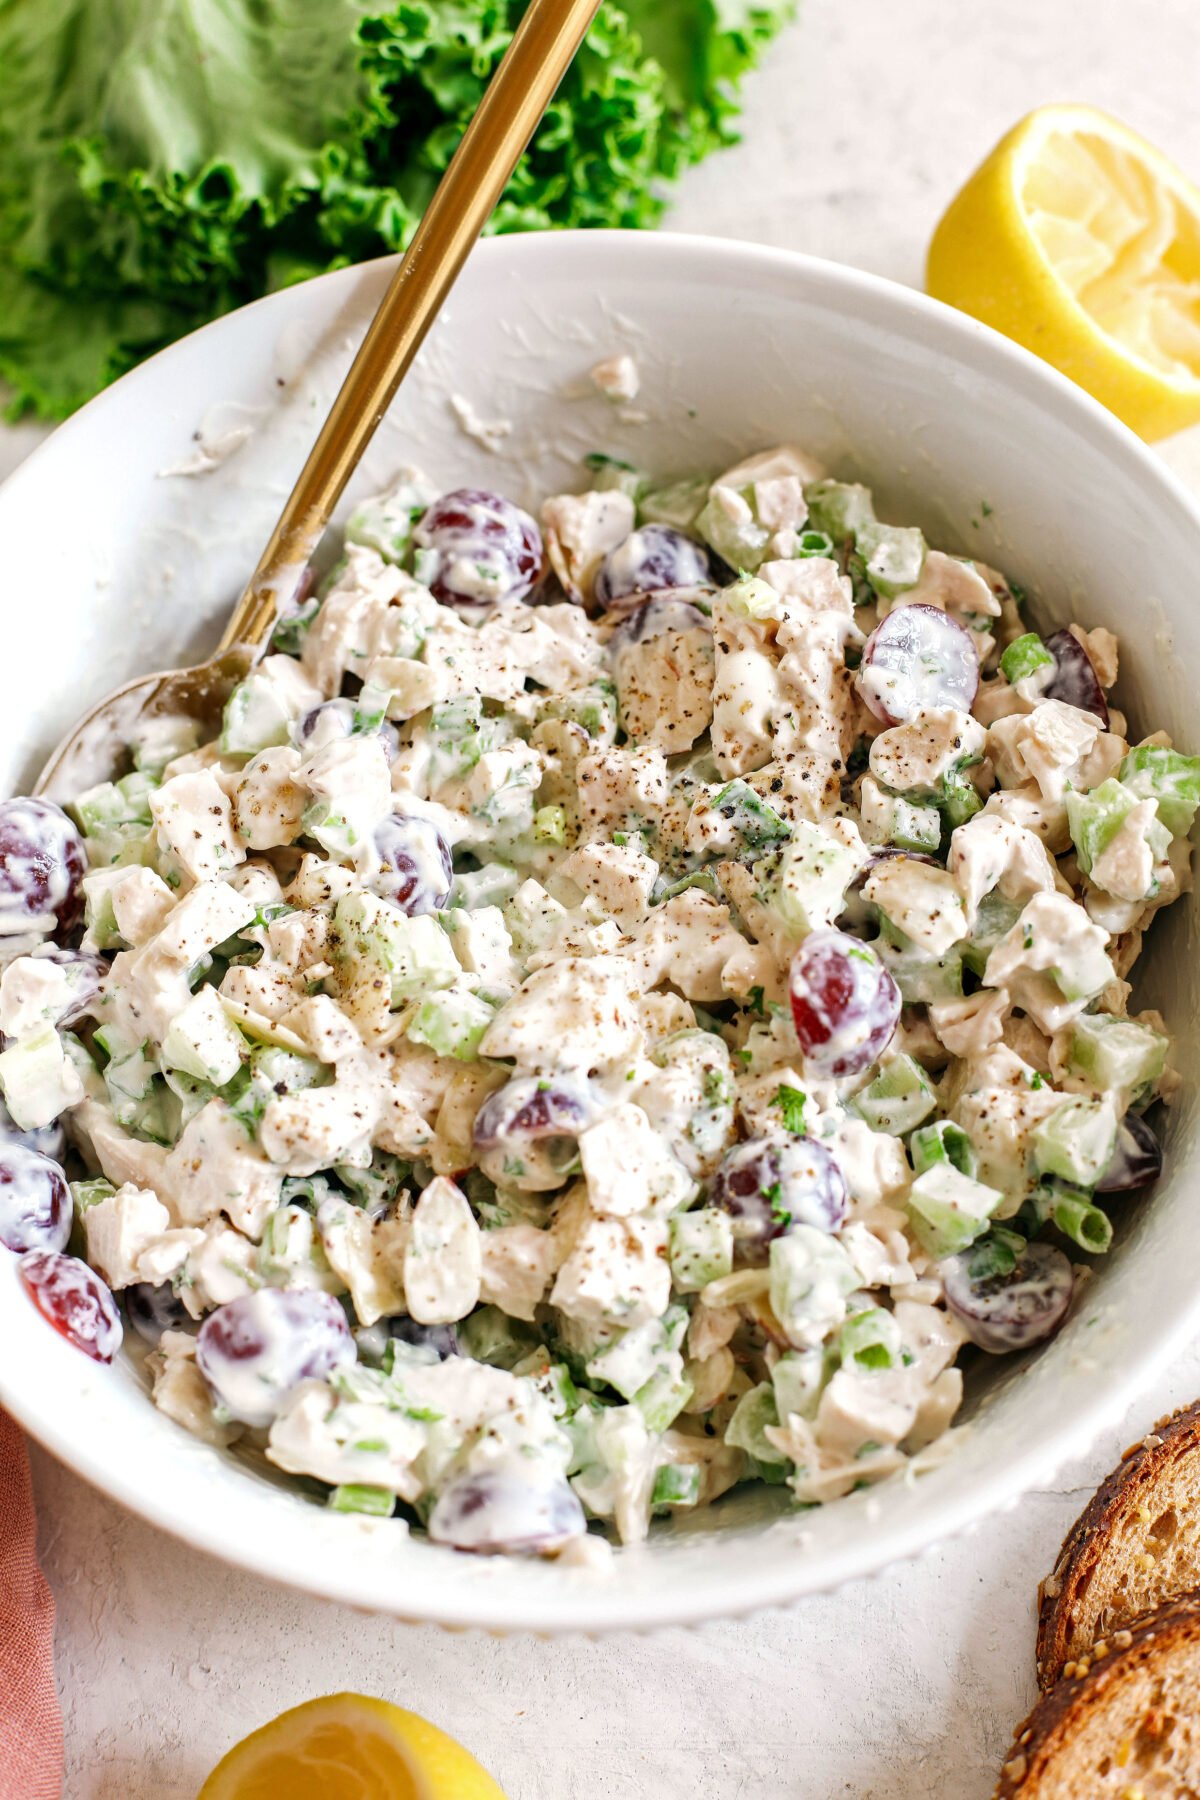 Healthy Chicken Salad made with tender chicken, Greek yogurt instead of mayo, crunchy celery, grapes, and sliced almonds for a delicious spin on a classic favorite!